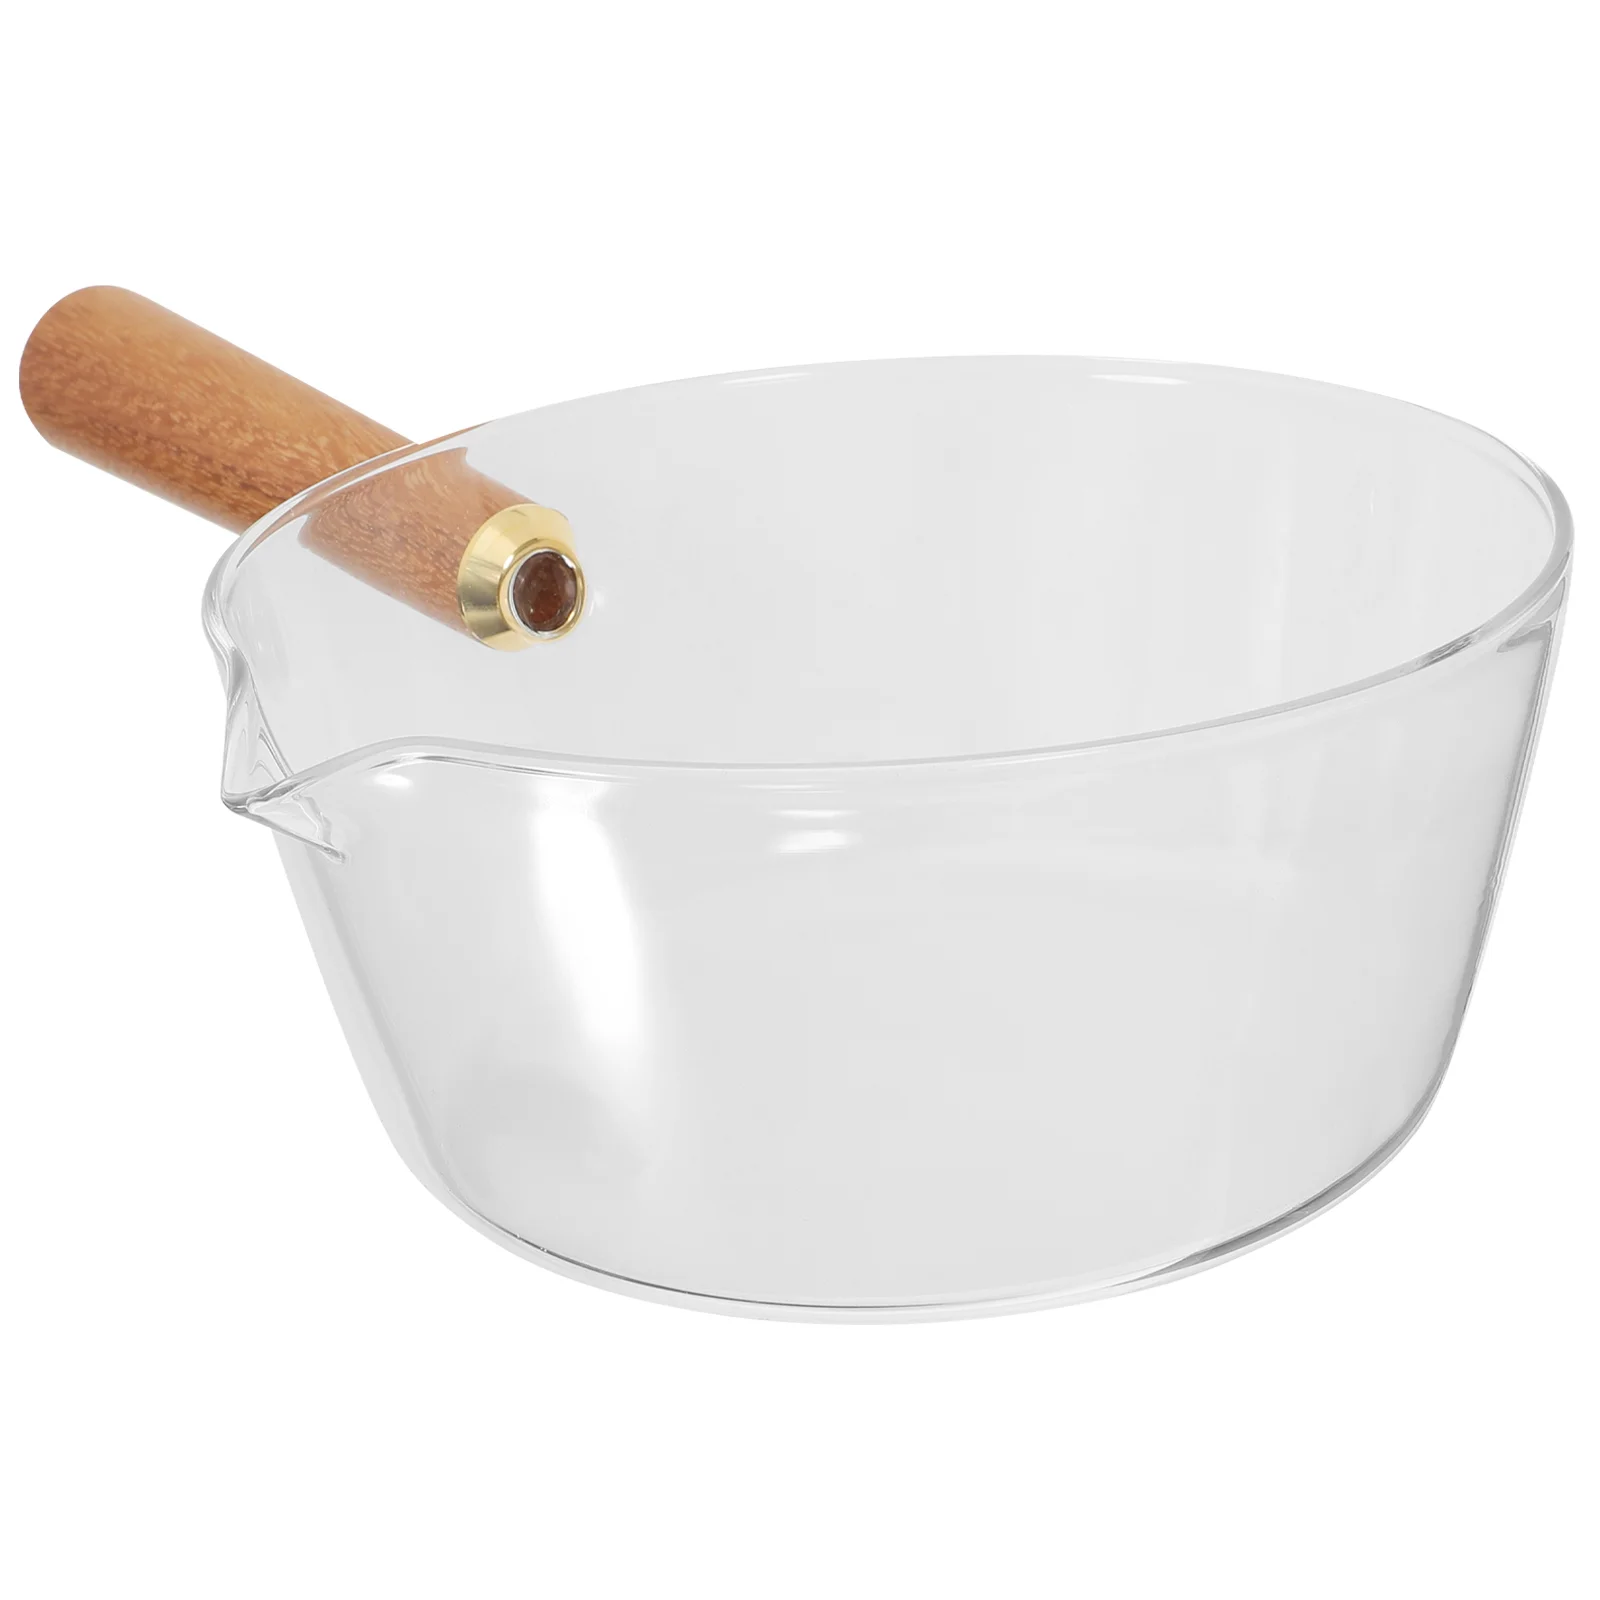 https://ae01.alicdn.com/kf/S730b648f784841009b2a02c0f7da86f2T/Milk-Pot-Household-Food-Stockpot-Mini-Candy-Kitchen-Supply-Wooden-Handle-Transparent-Noodle-Child-Stainless-Steel.jpg